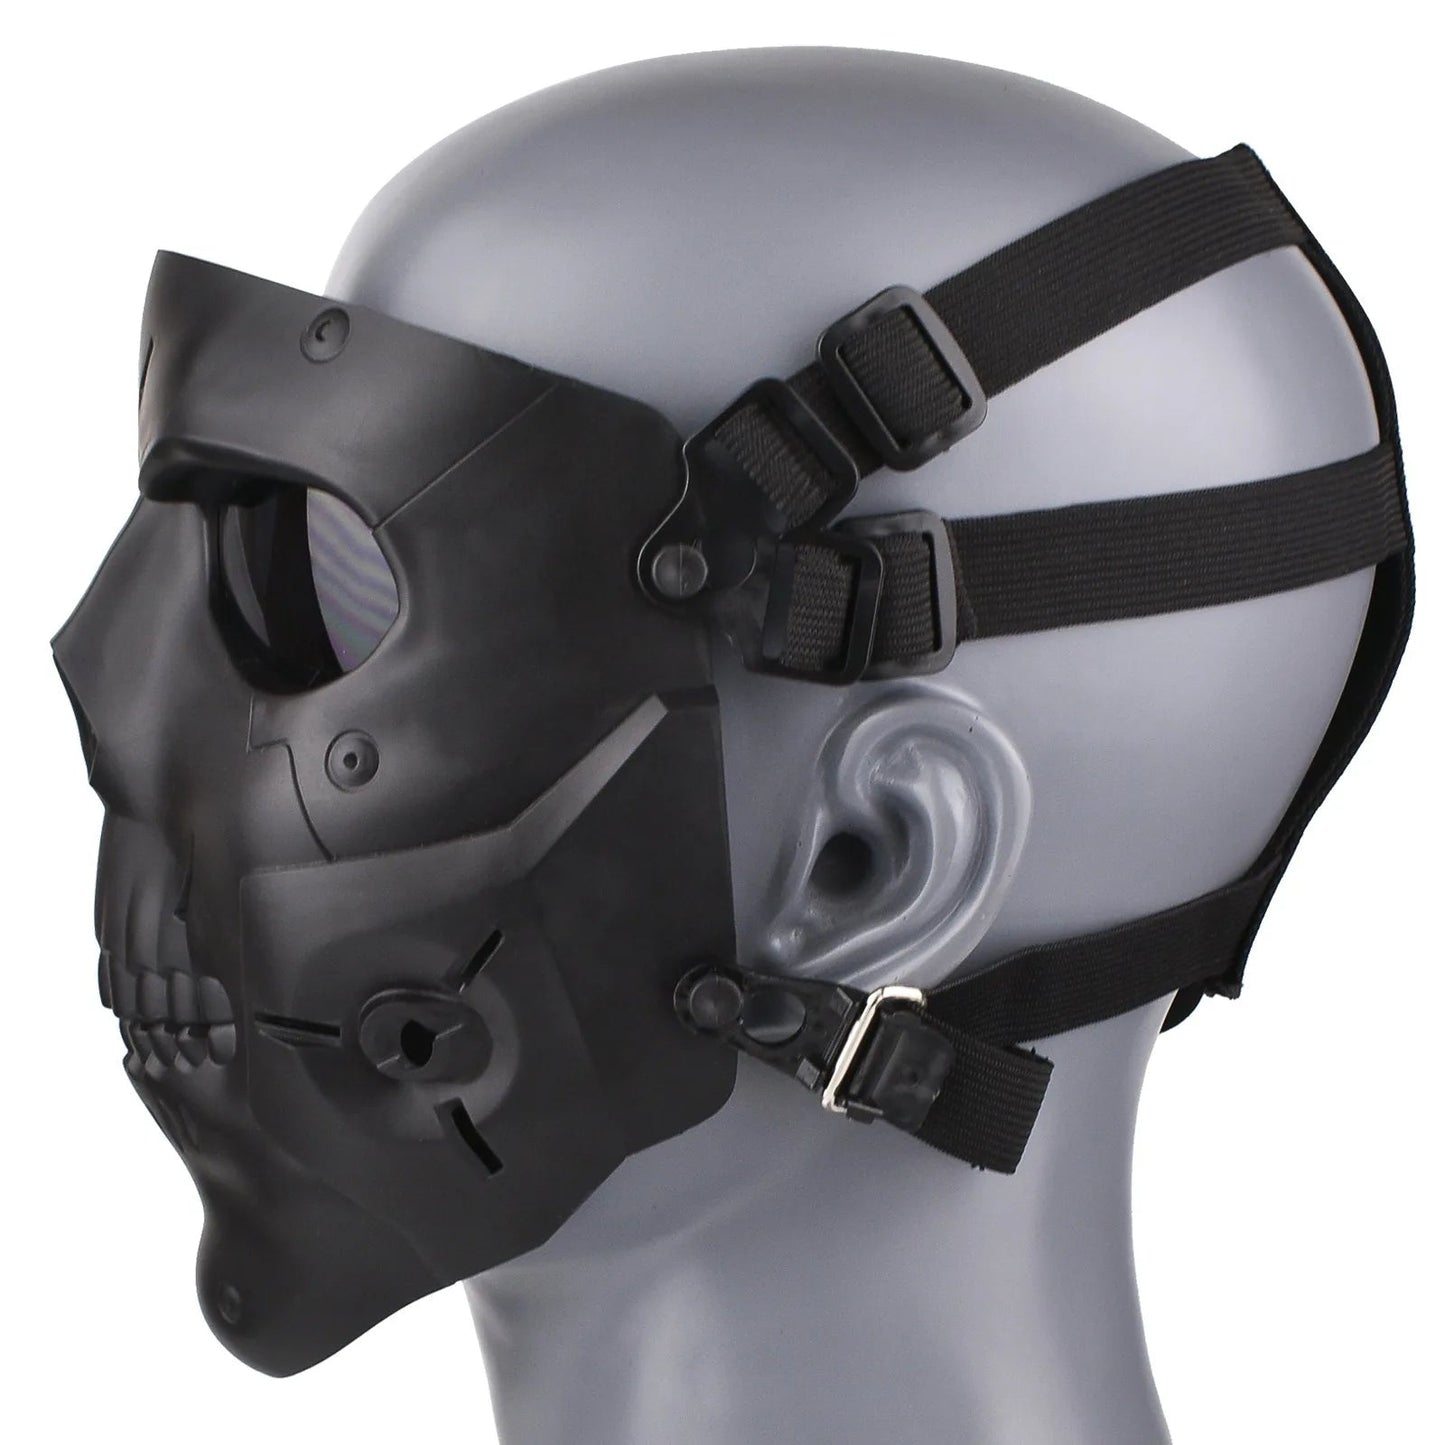 Cyberpunk Tactical Protective Mask - The Rave Cave